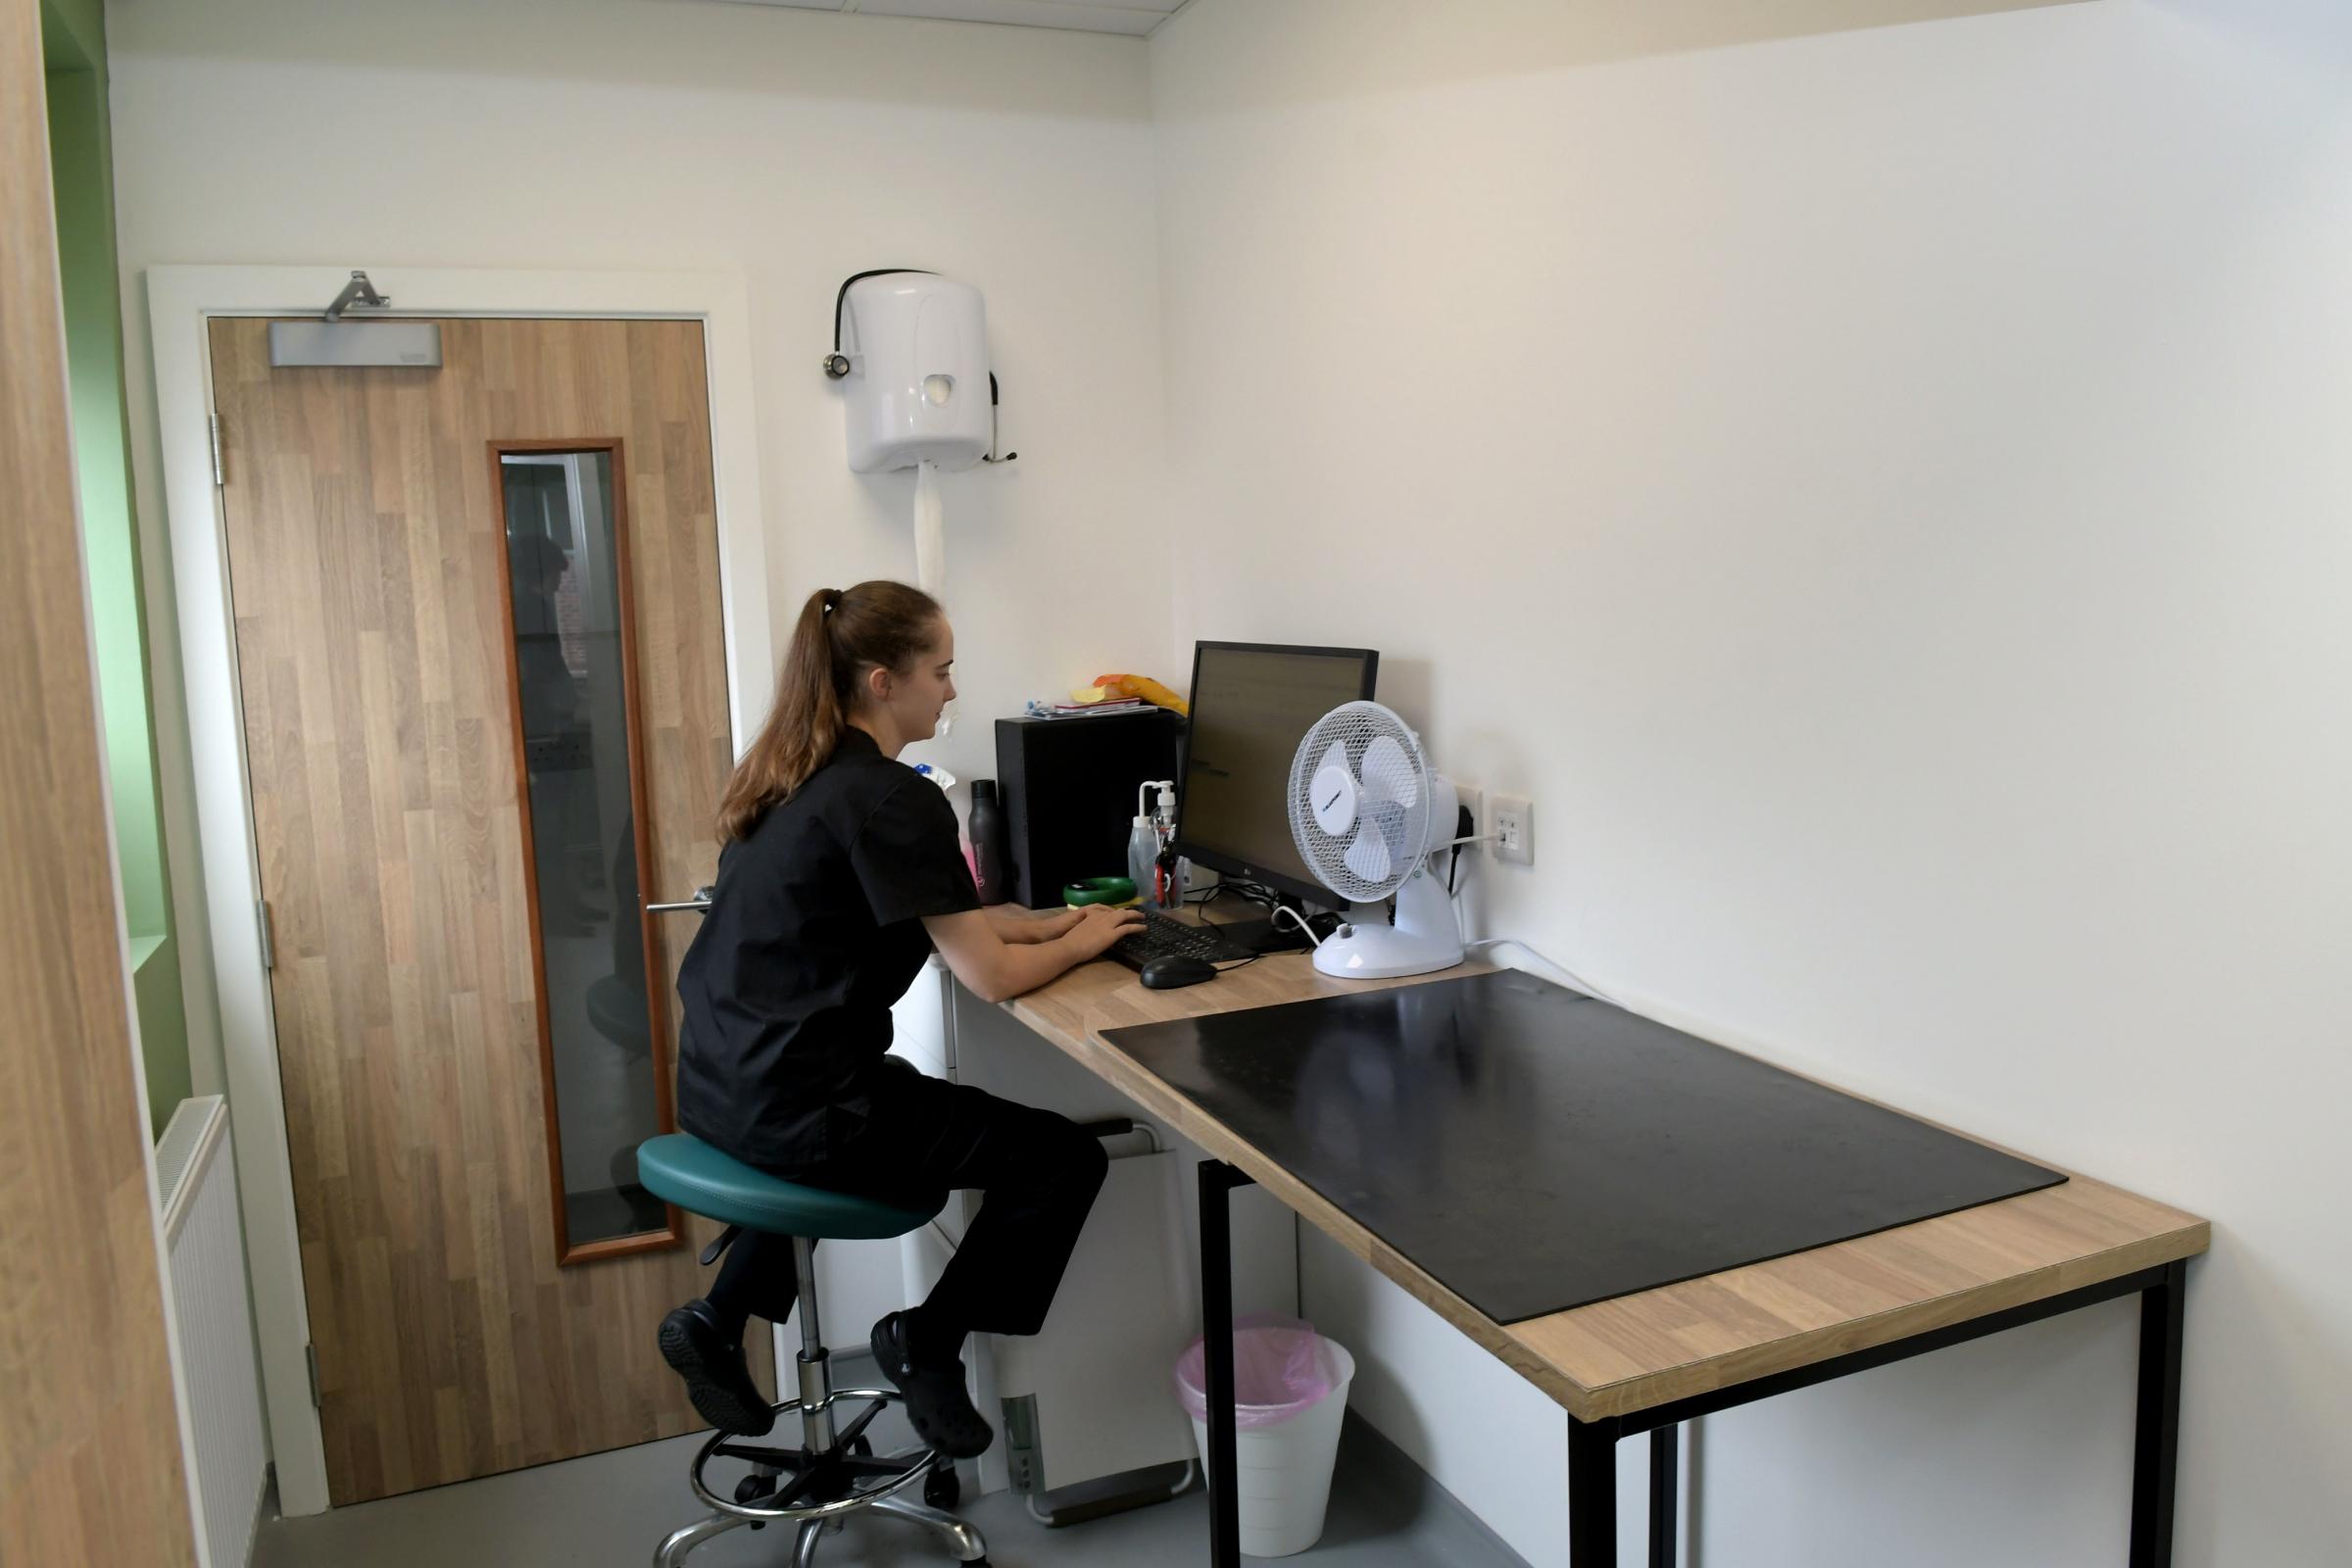 One of the consultation rooms